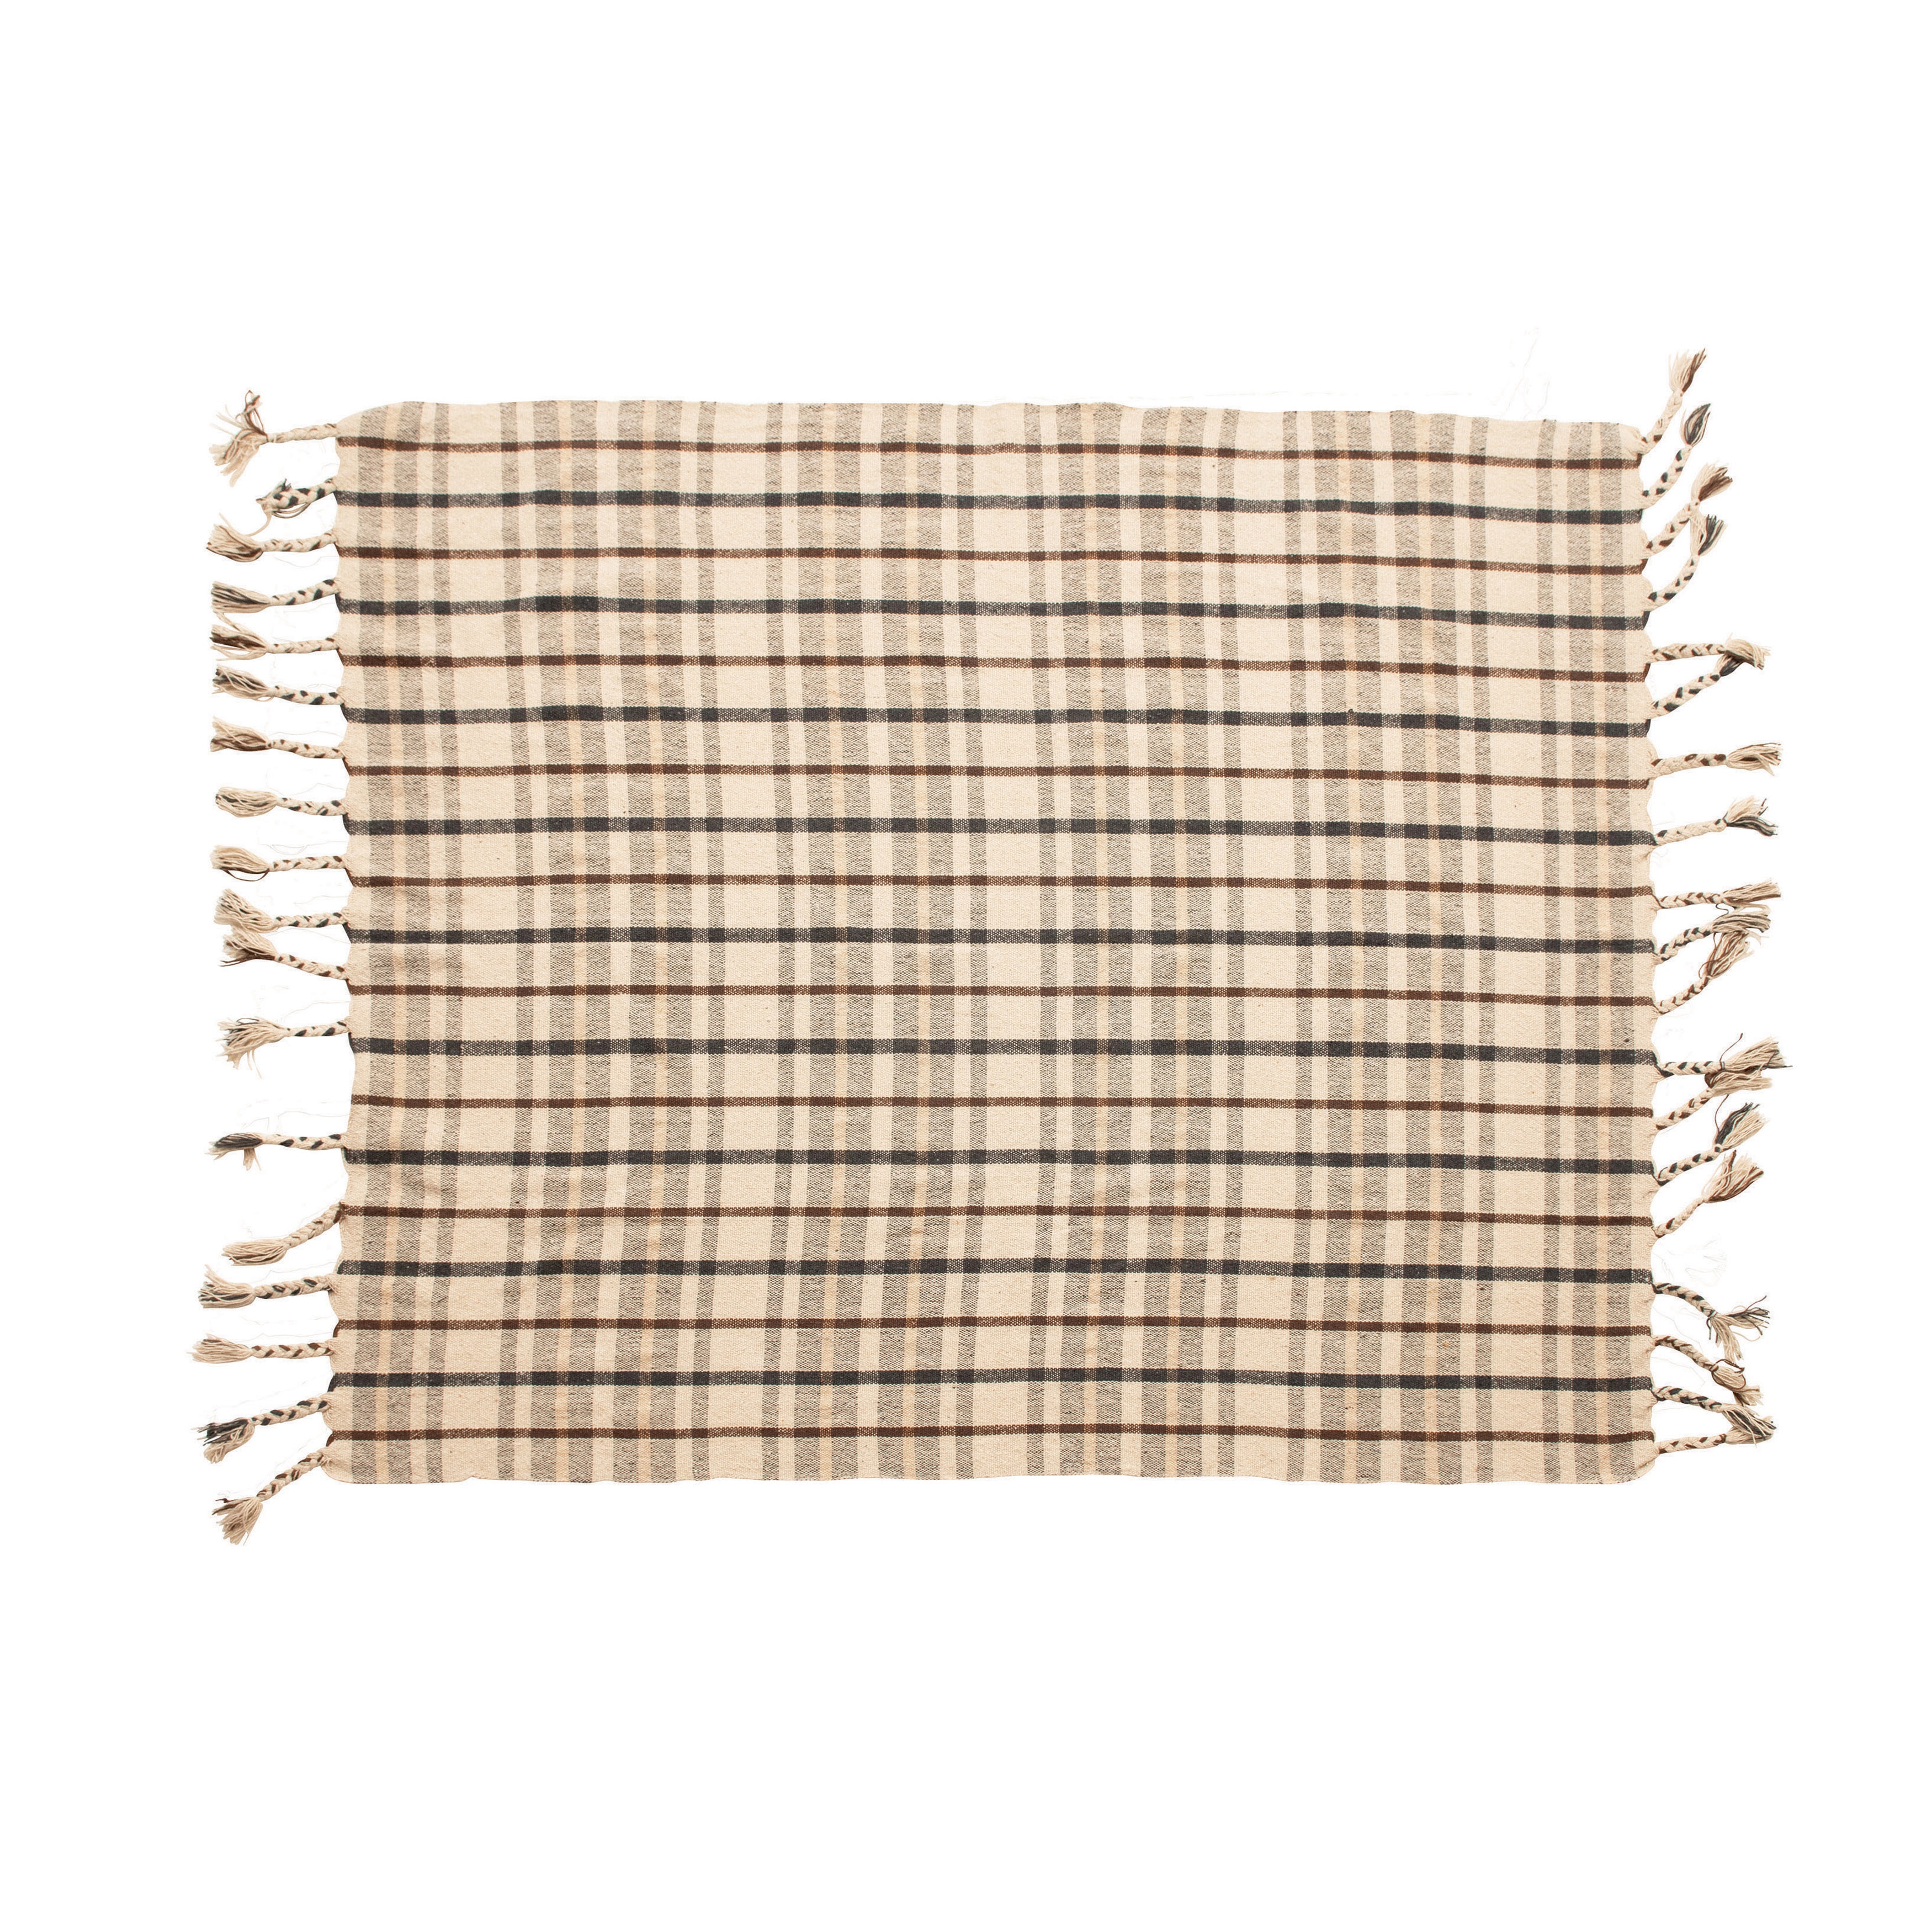 Woven Recycled Cotton Blend Plaid Throw with Tassels, Charcoal Color & Brown - Image 0